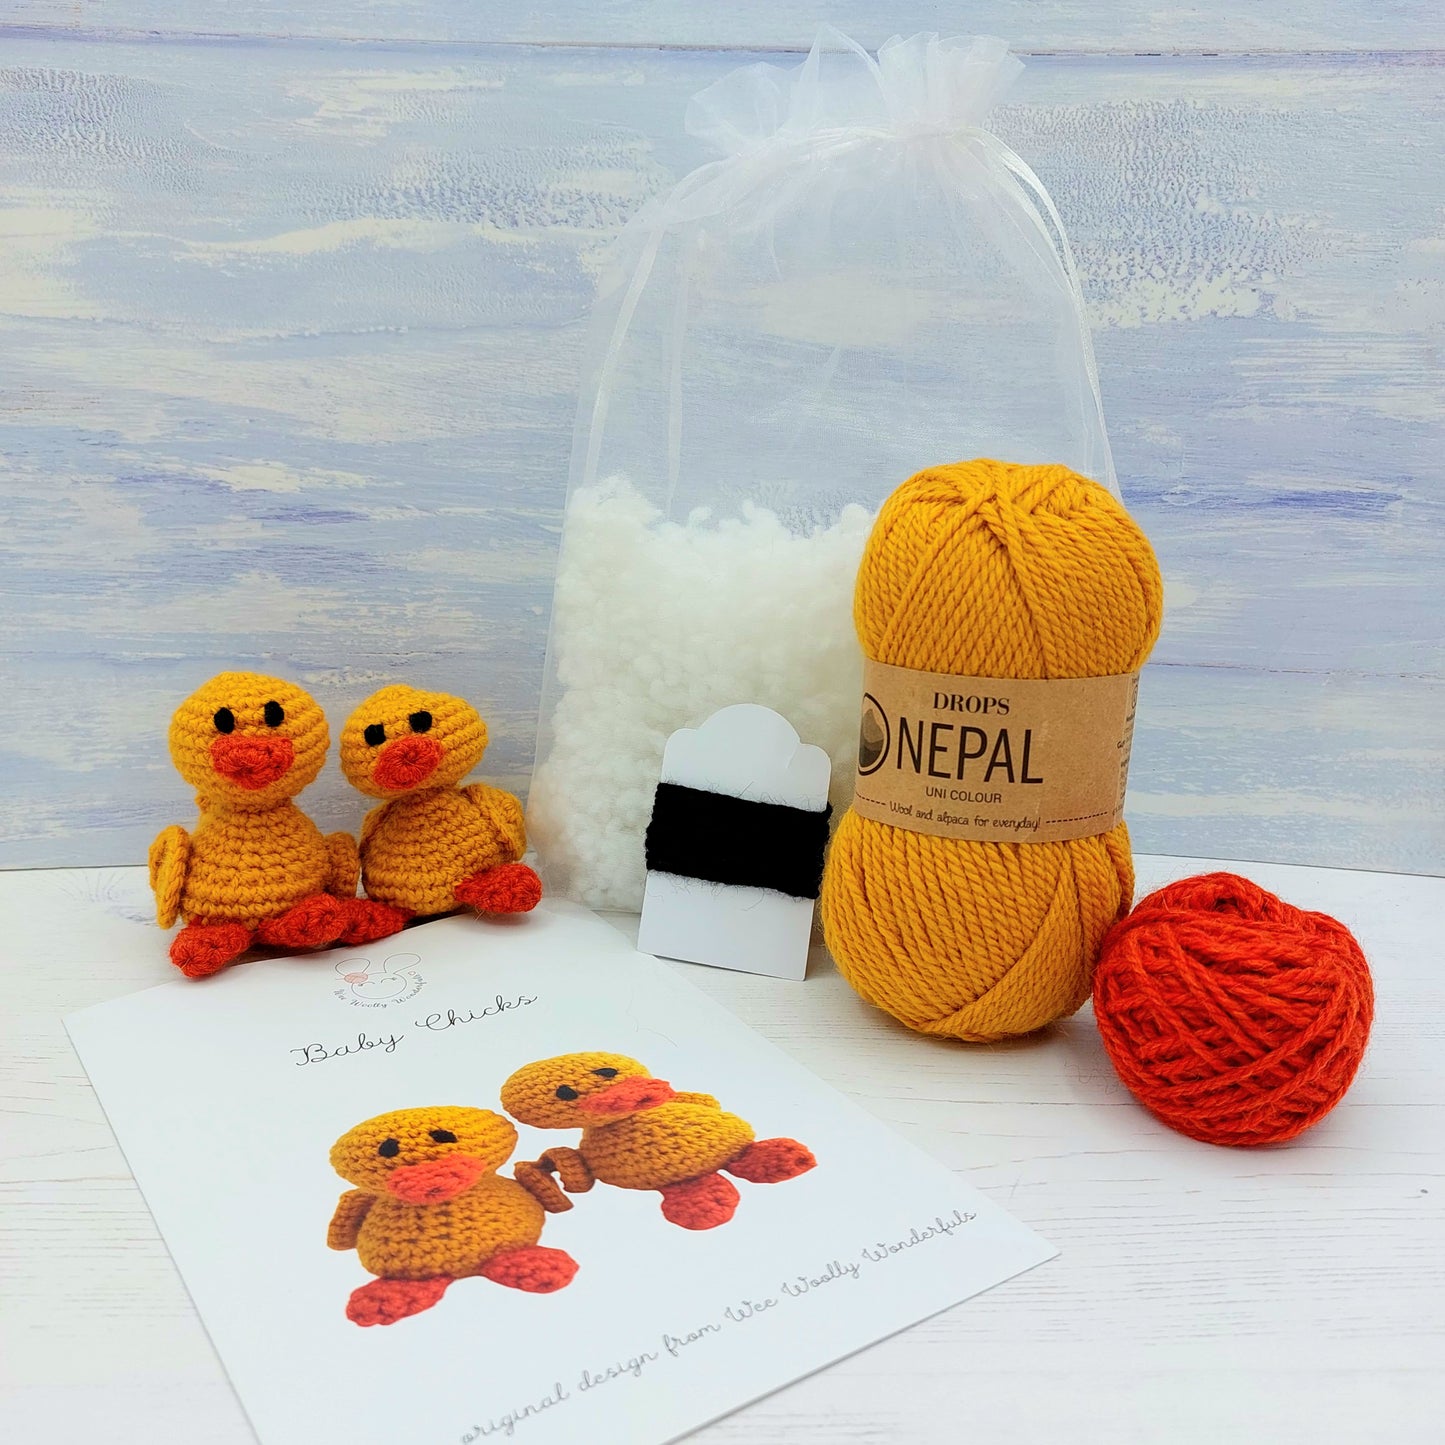 Contents of Crochet Chicks Kit, including wool, pattern and stuffing